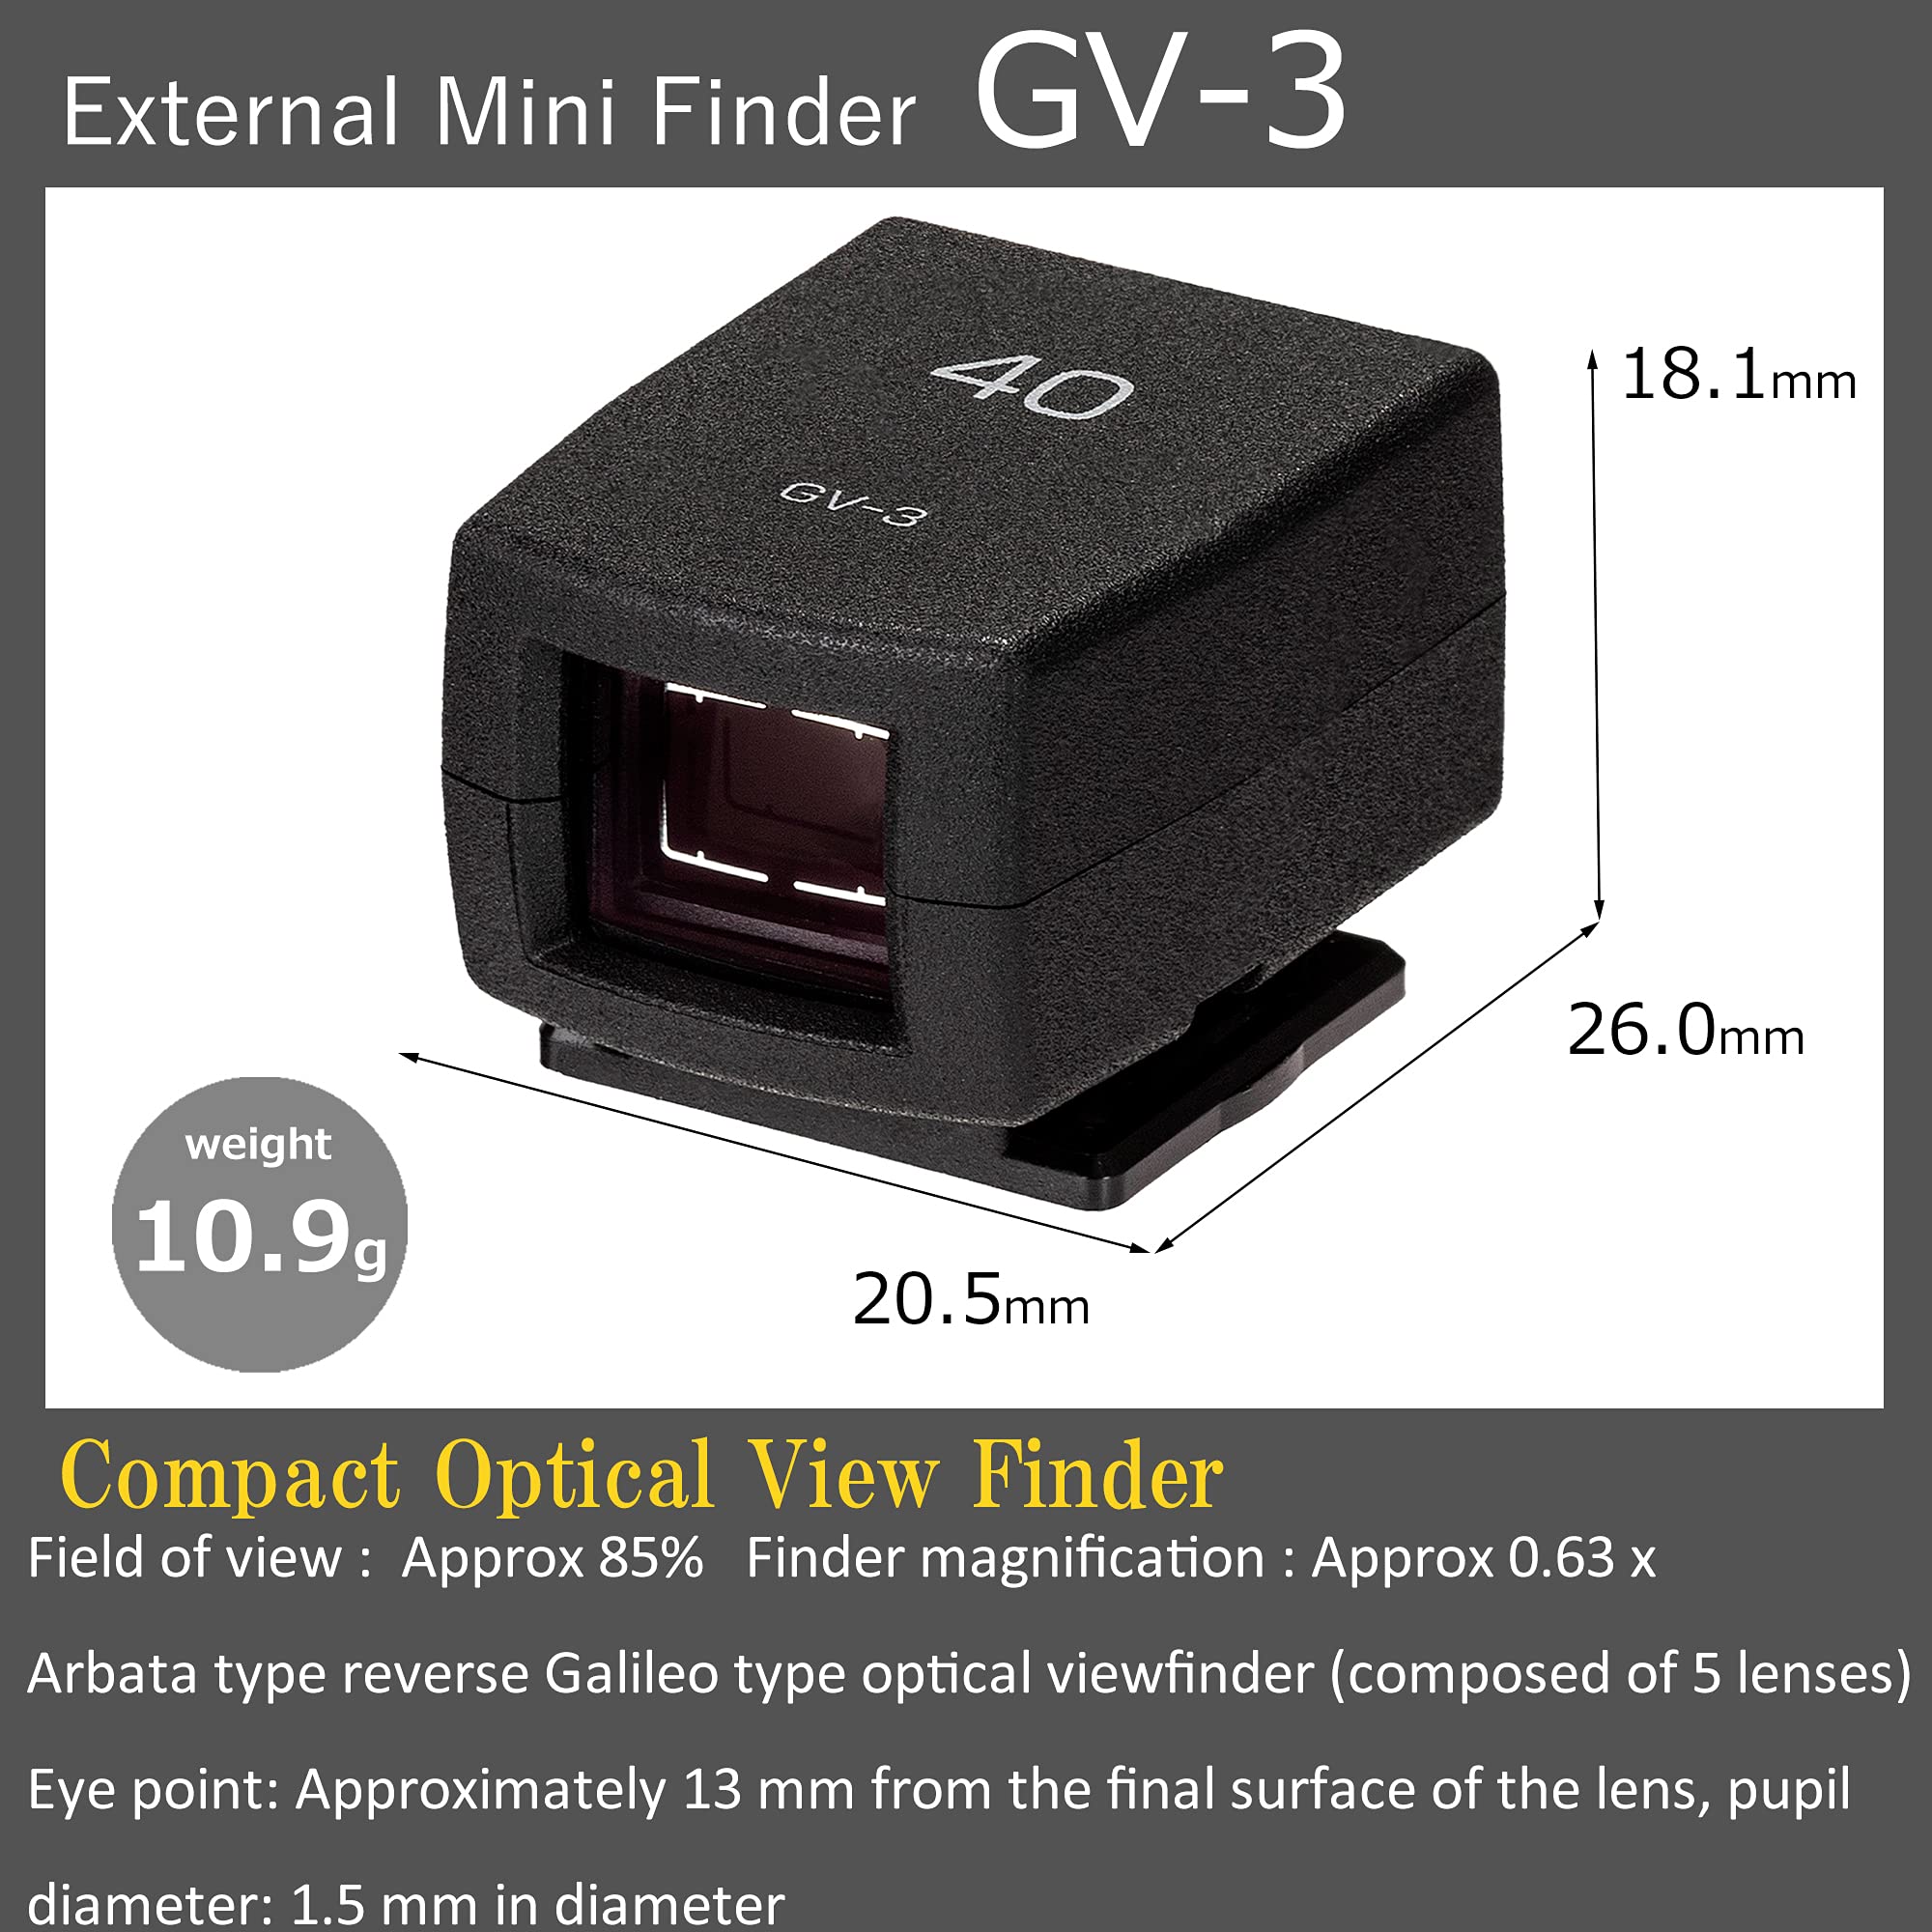 RICOH External Mini Finder GV-3 [Compatible Model: RICOH GR IIIx] [Optical viewfinder with a 40 mm Angle of View Attached to The hot Shoe] [Field of View Approx. 85%] [Manufacturer Warranty 1 Year